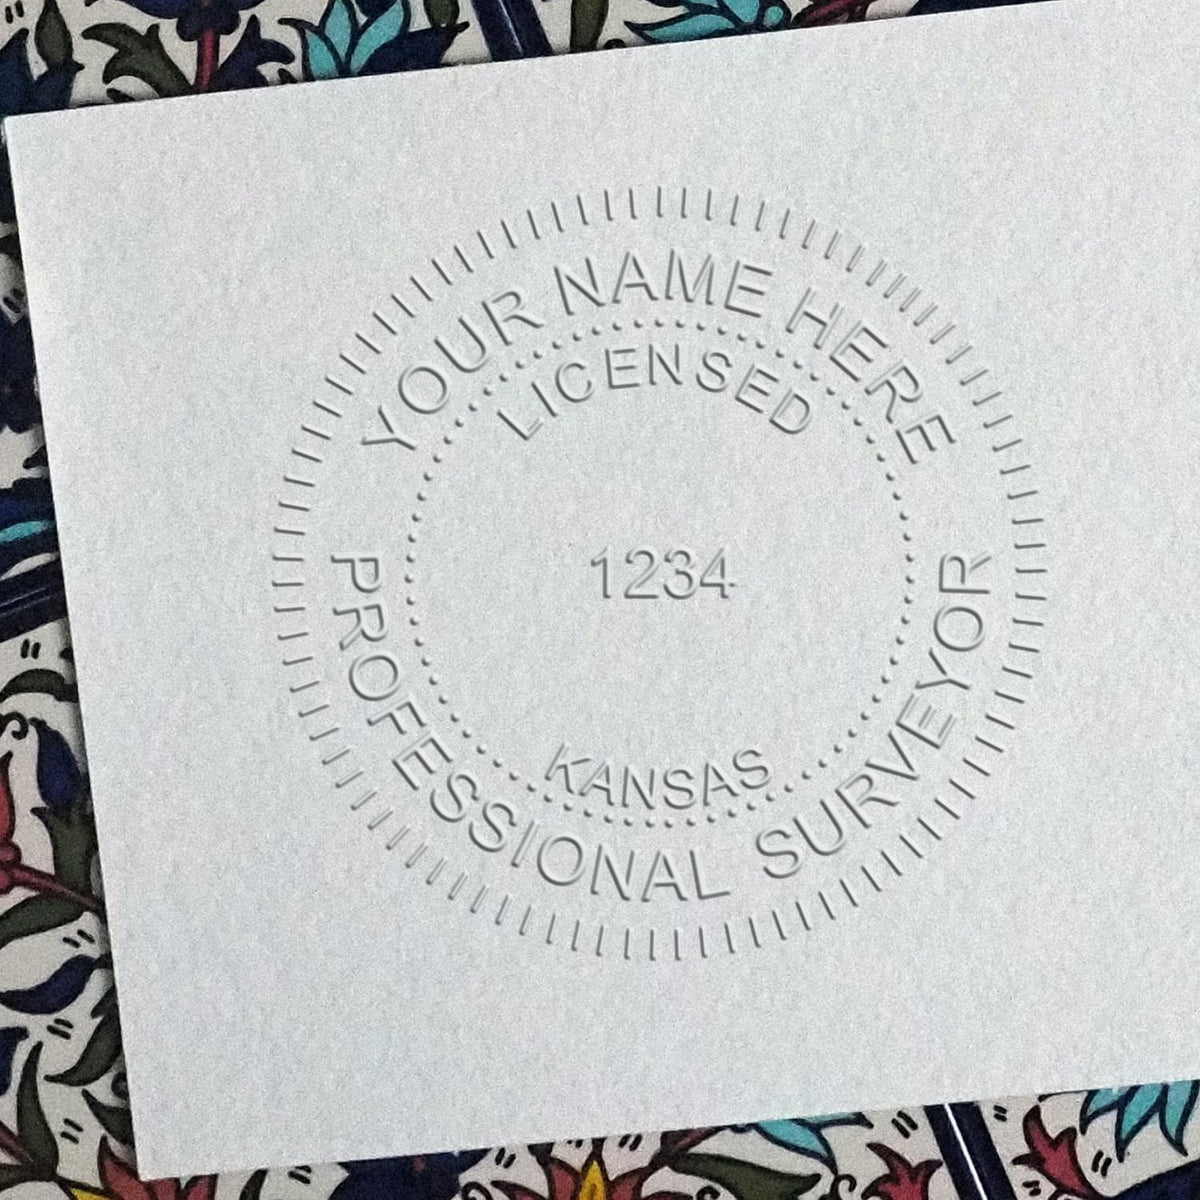 The Gift Kansas Land Surveyor Seal stamp impression comes to life with a crisp, detailed image stamped on paper - showcasing true professional quality.